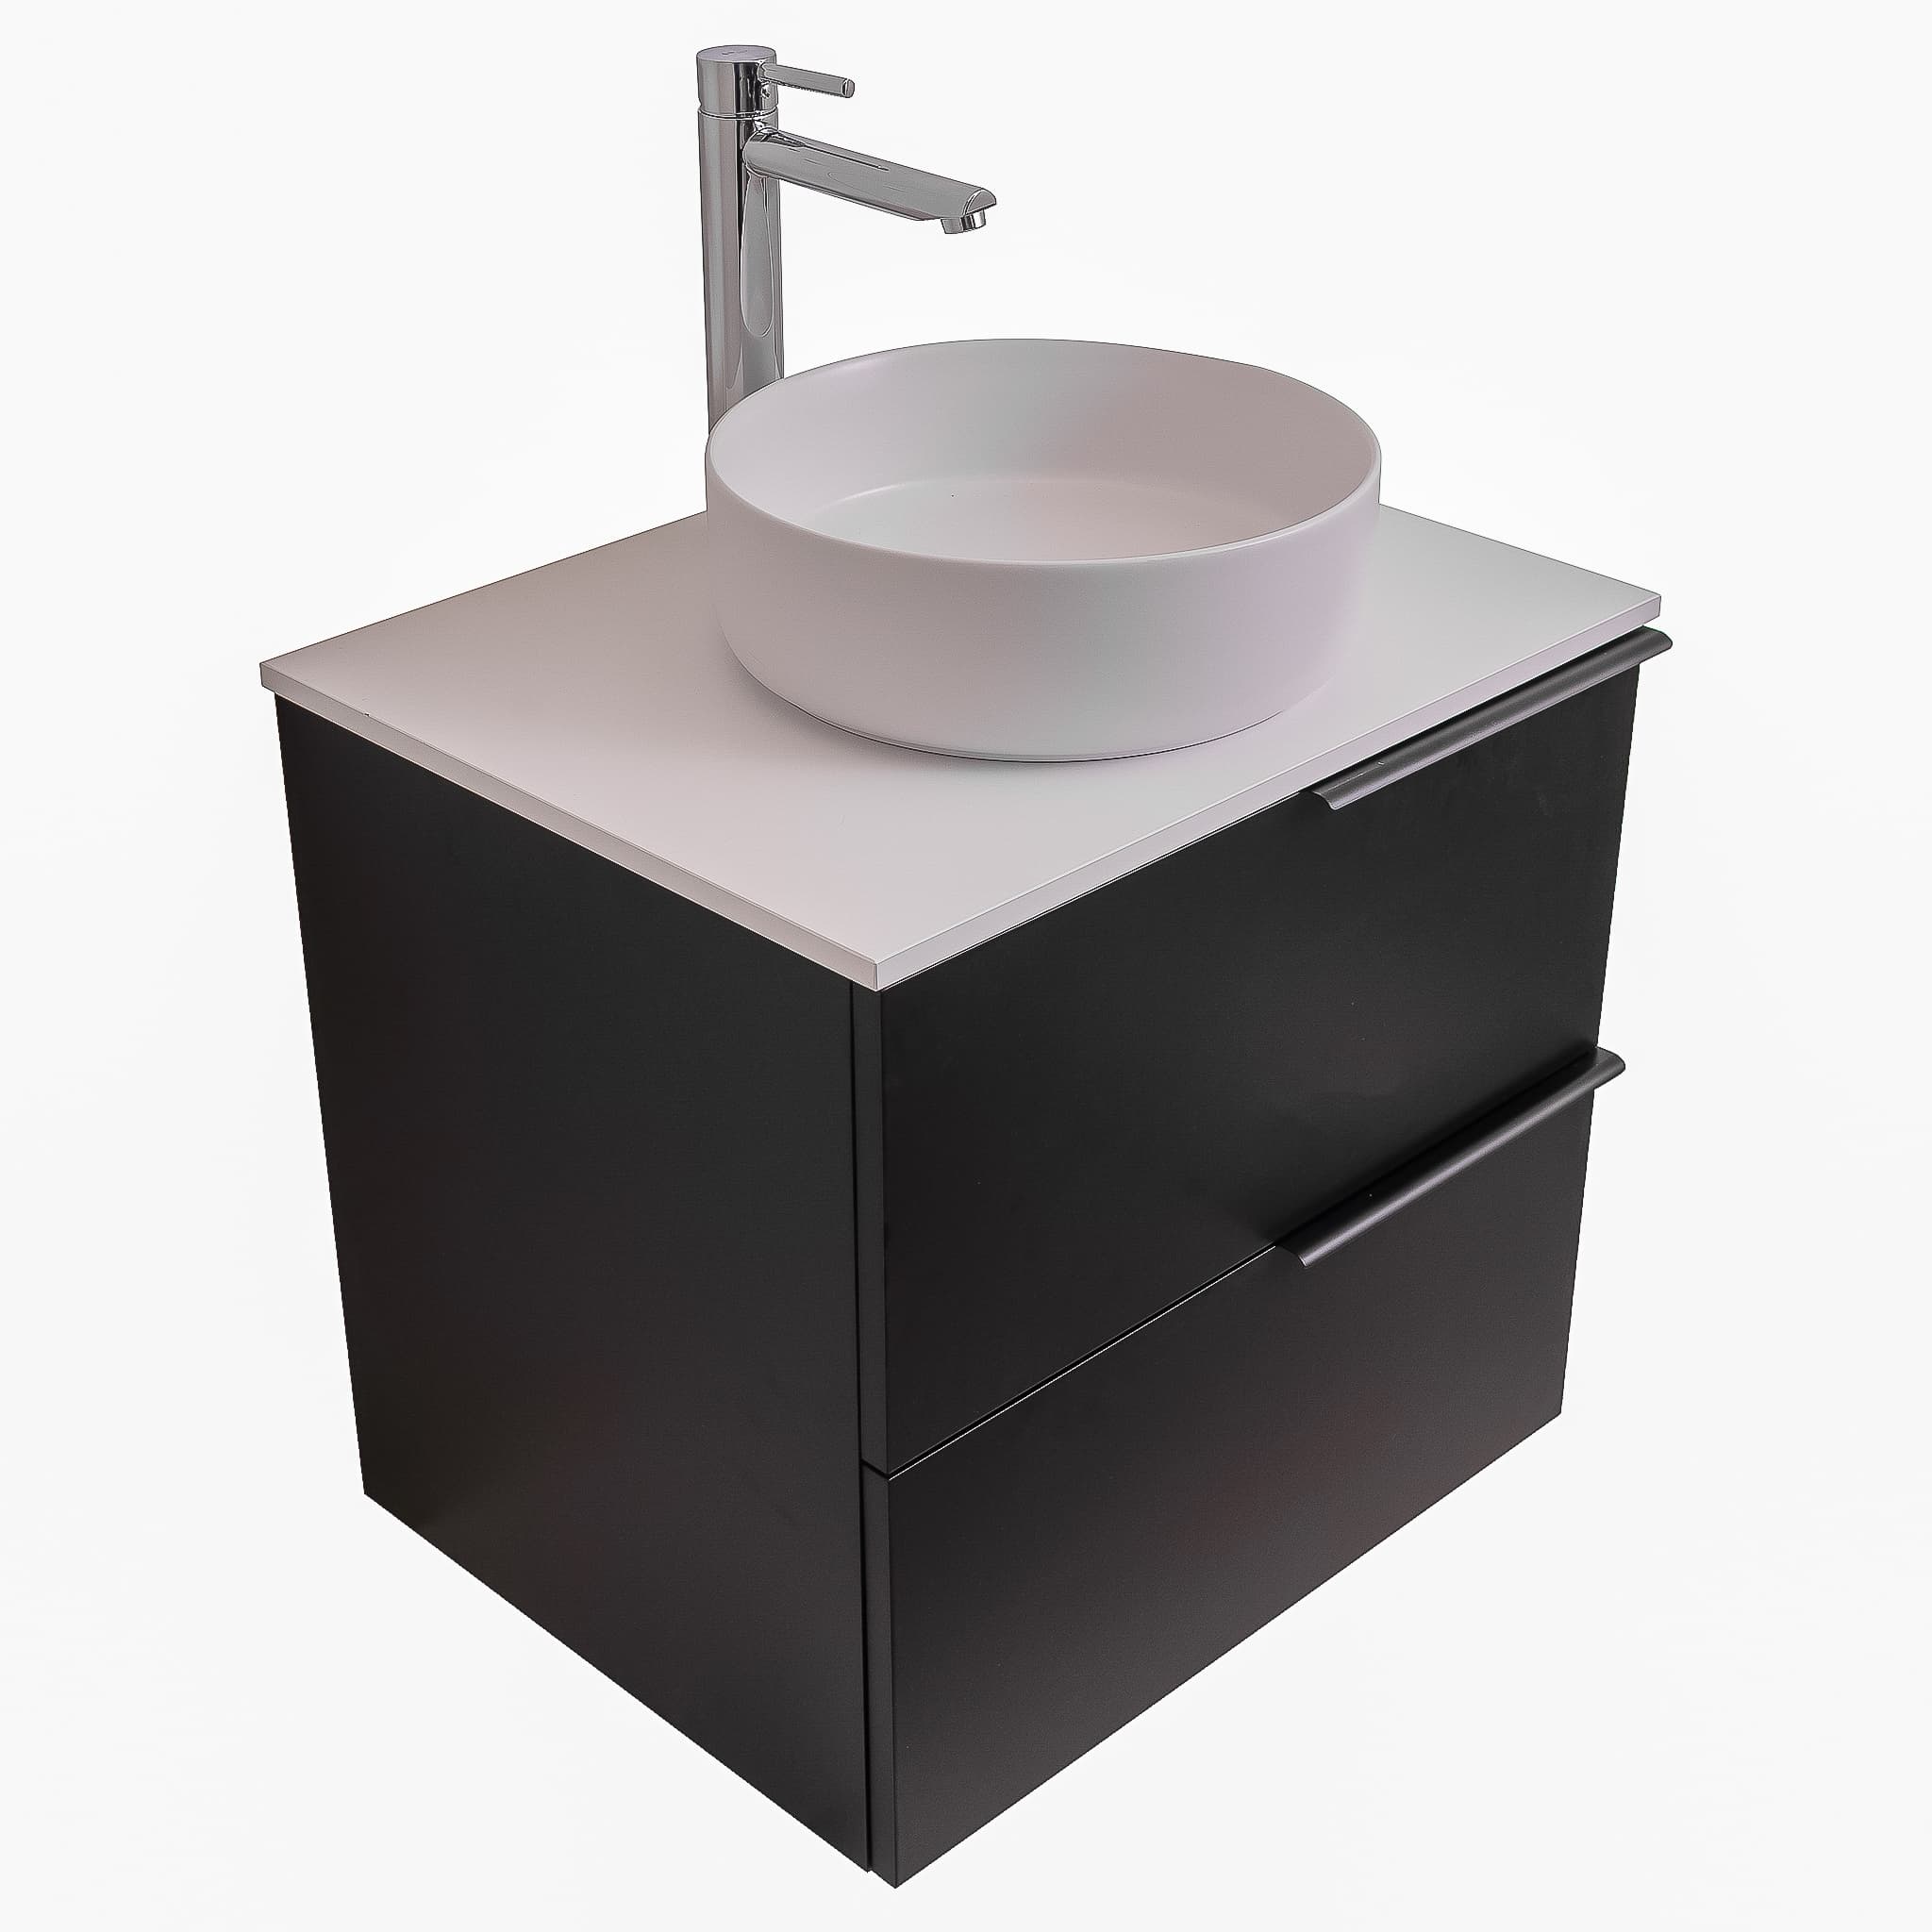 Mallorca 23.5 Matte Black Cabinet, Ares White Top And Ares White Ceramic Basin, Wall Mounted Modern Vanity Set